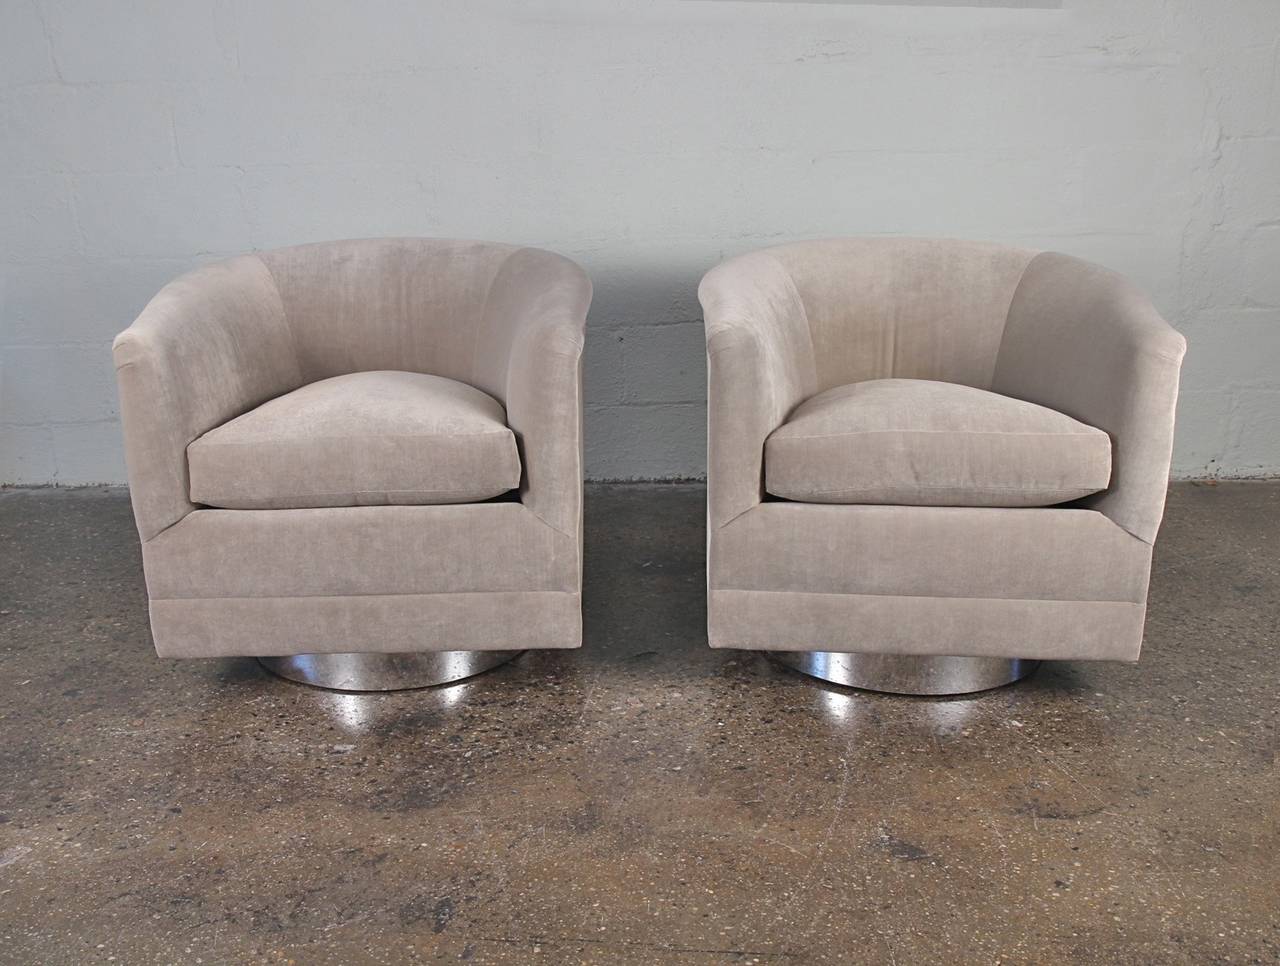 Luxurious swivel lounge chairs newly upholstered in a luscious Romo velvet in soft gray. Chrome bases add a sexy gleam. Designed by Edward Wormley for Dunbar in the 1960s. In excellent vintage condition. Sold as a pair.

Dimensions: 29